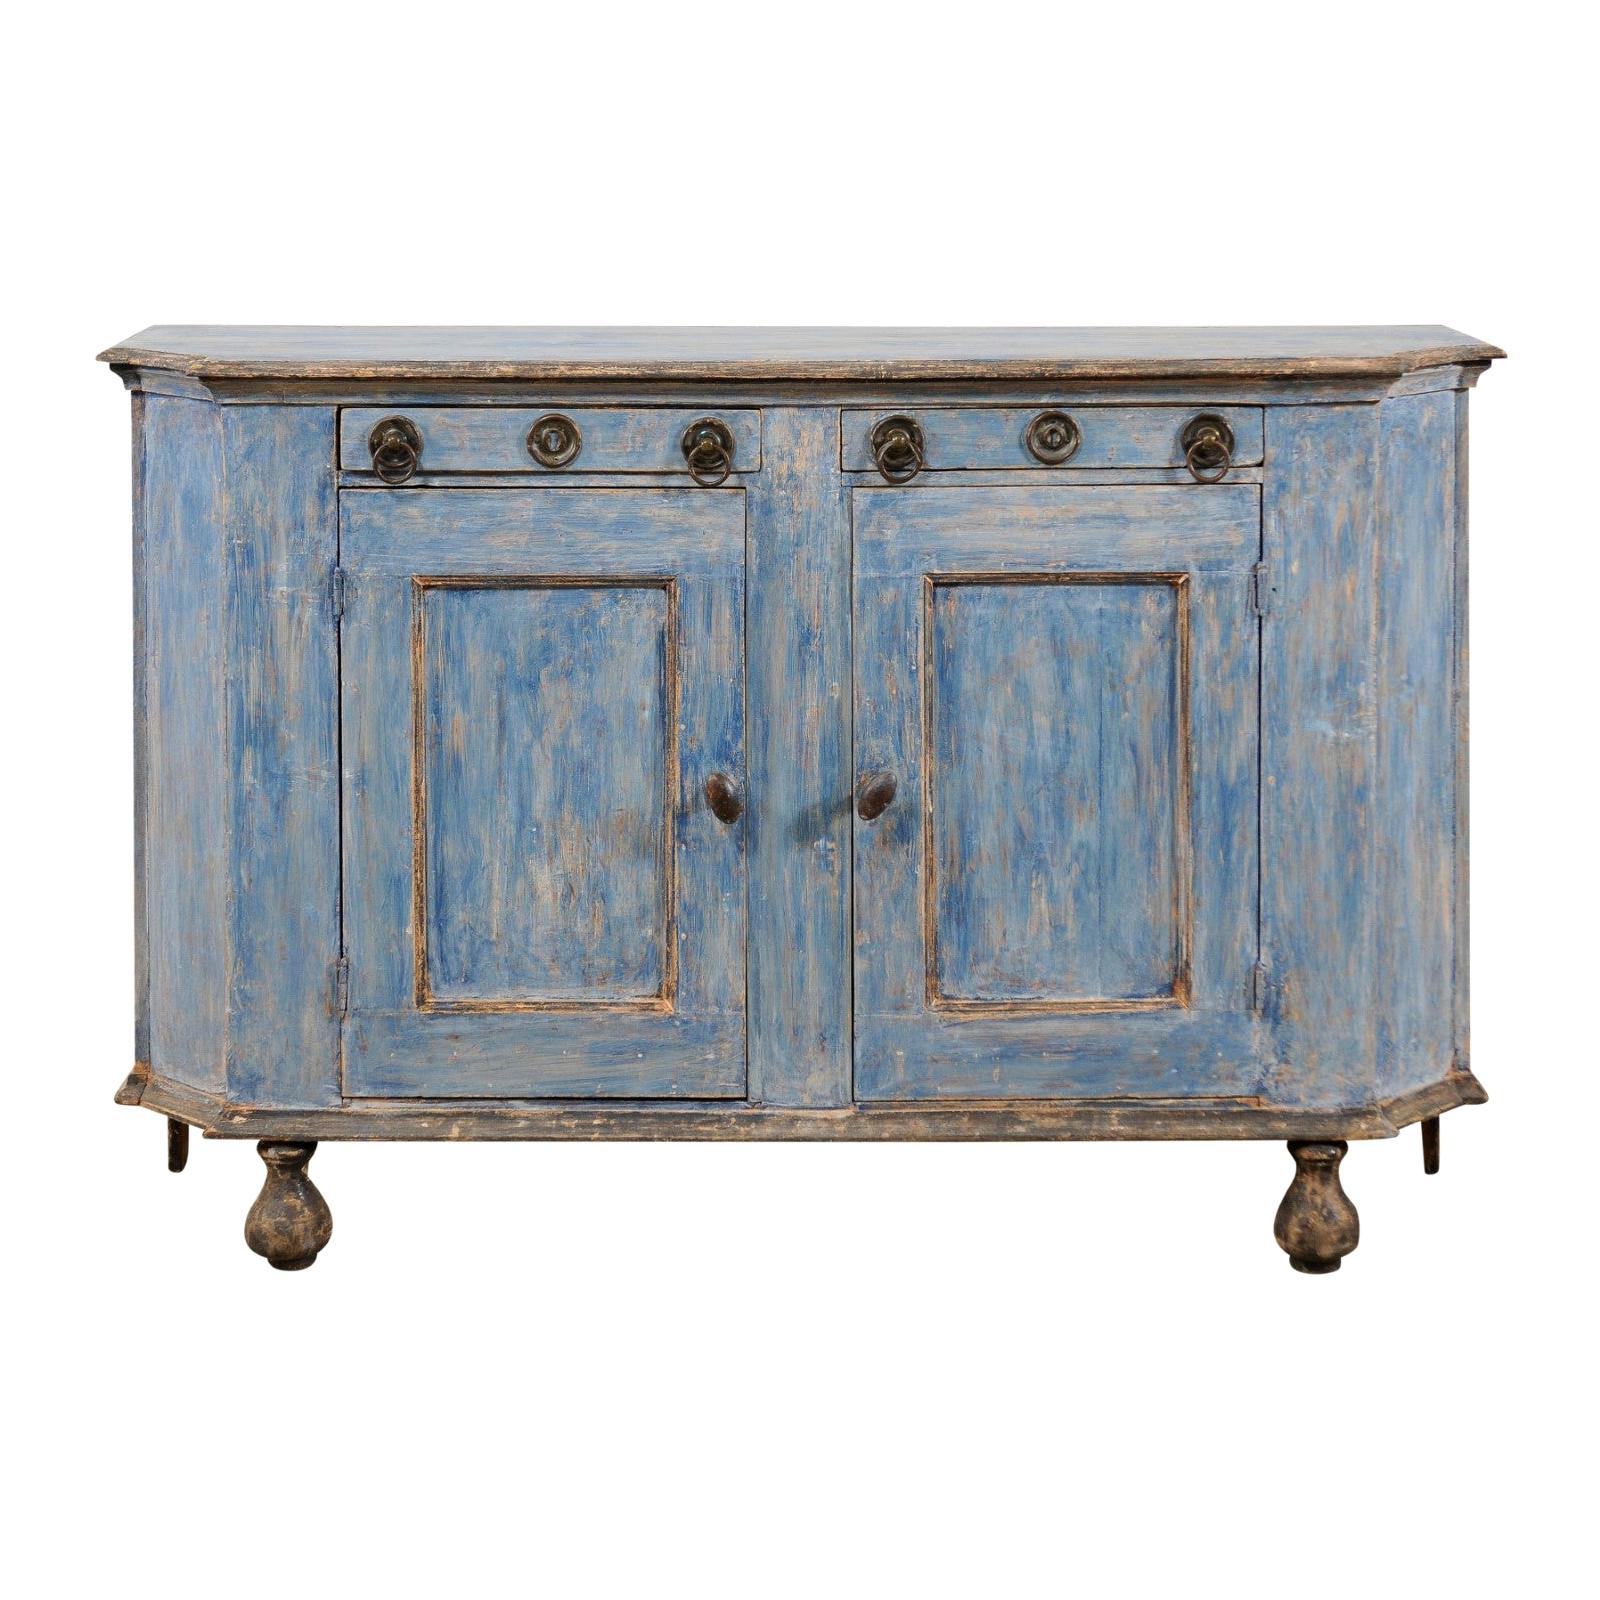 French 19th Century Painted Wood Sideboard Cabinet in Blue with Charcoal Accents